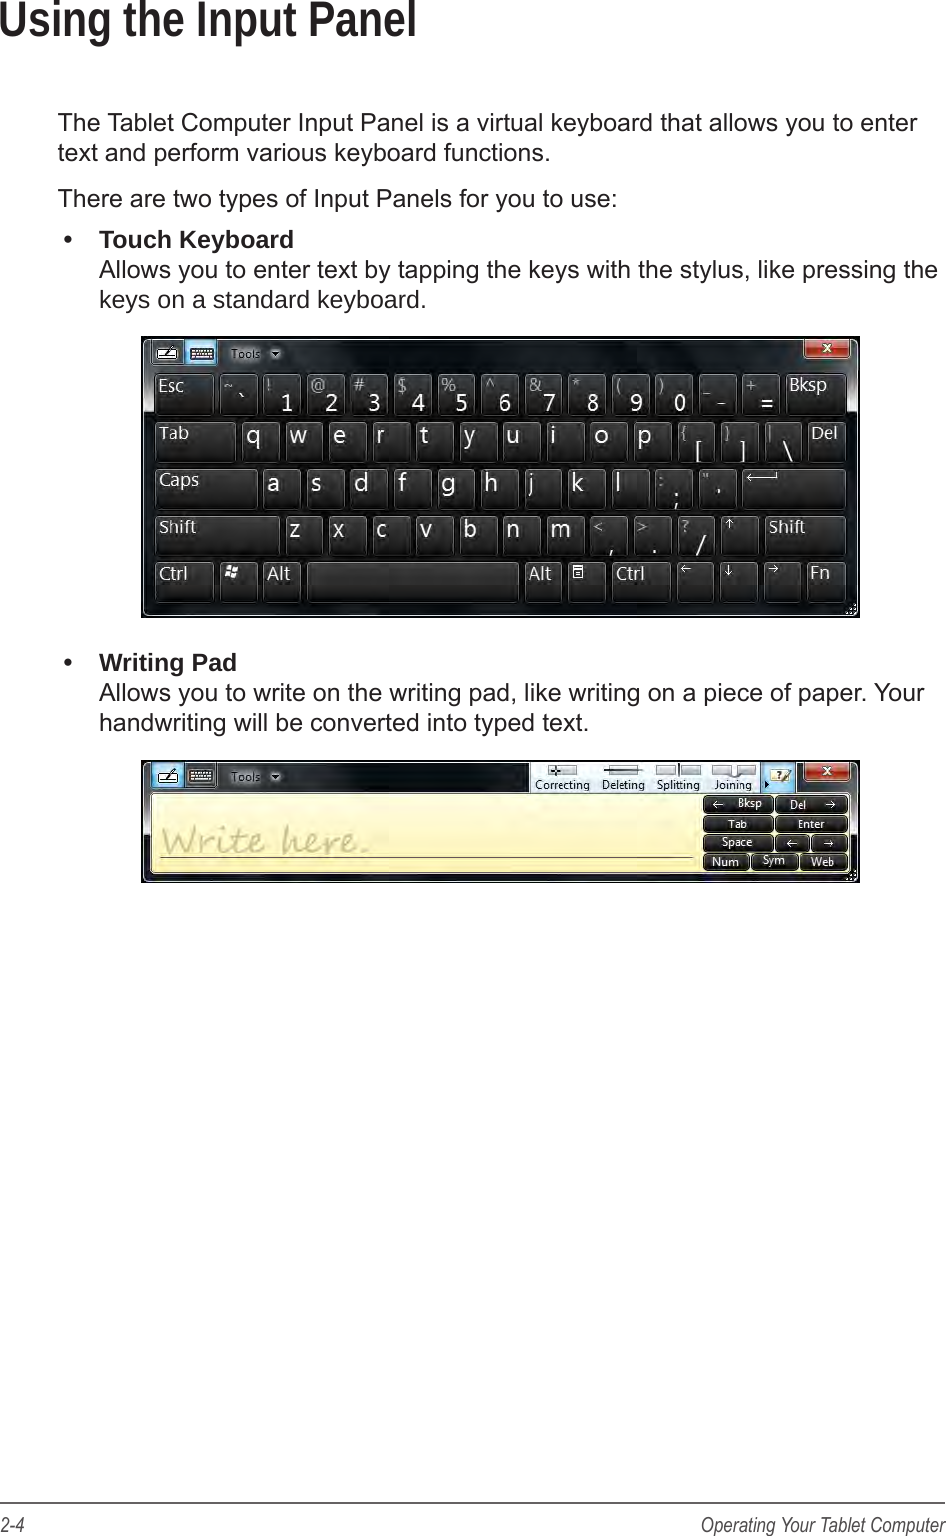 2-4 Operating Your Tablet ComputerUsing the Input PanelThe Tablet Computer Input Panel is a virtual keyboard that allows you to enter text and perform various keyboard functions.There are two types of Input Panels for you to use:•  Touch Keyboard Allows you to enter text by tapping the keys with the stylus, like pressing the keys on a standard keyboard.•  Writing Pad Allows you to write on the writing pad, like writing on a piece of paper. Your handwriting will be converted into typed text.